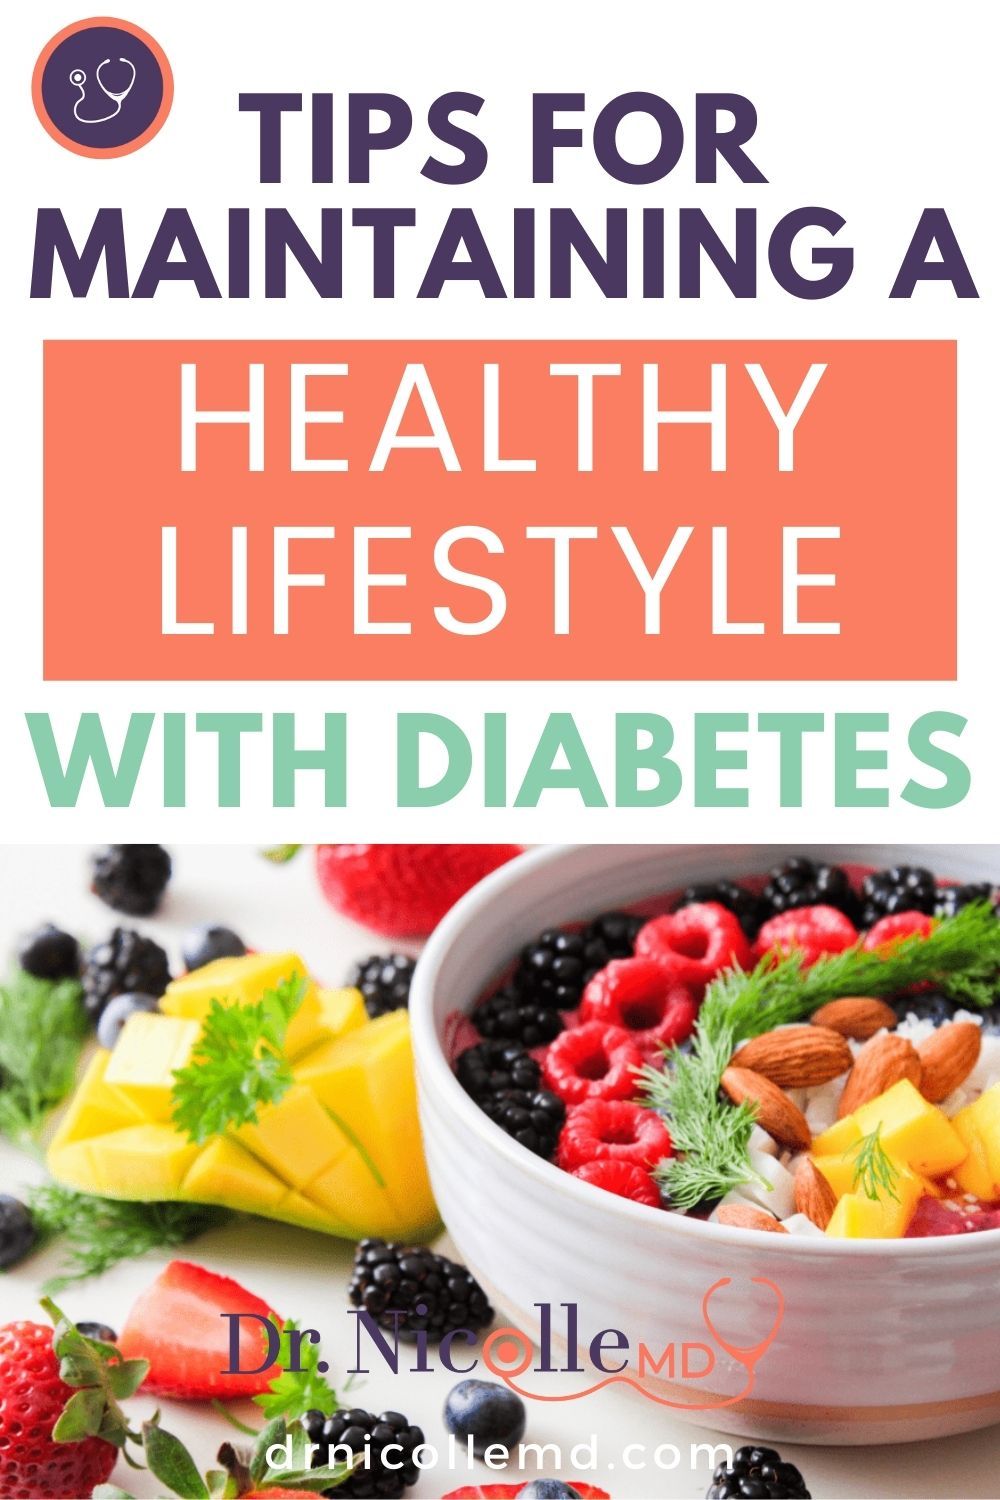 Tips For Maintaining a Healthy Lifestyle With Diabetes